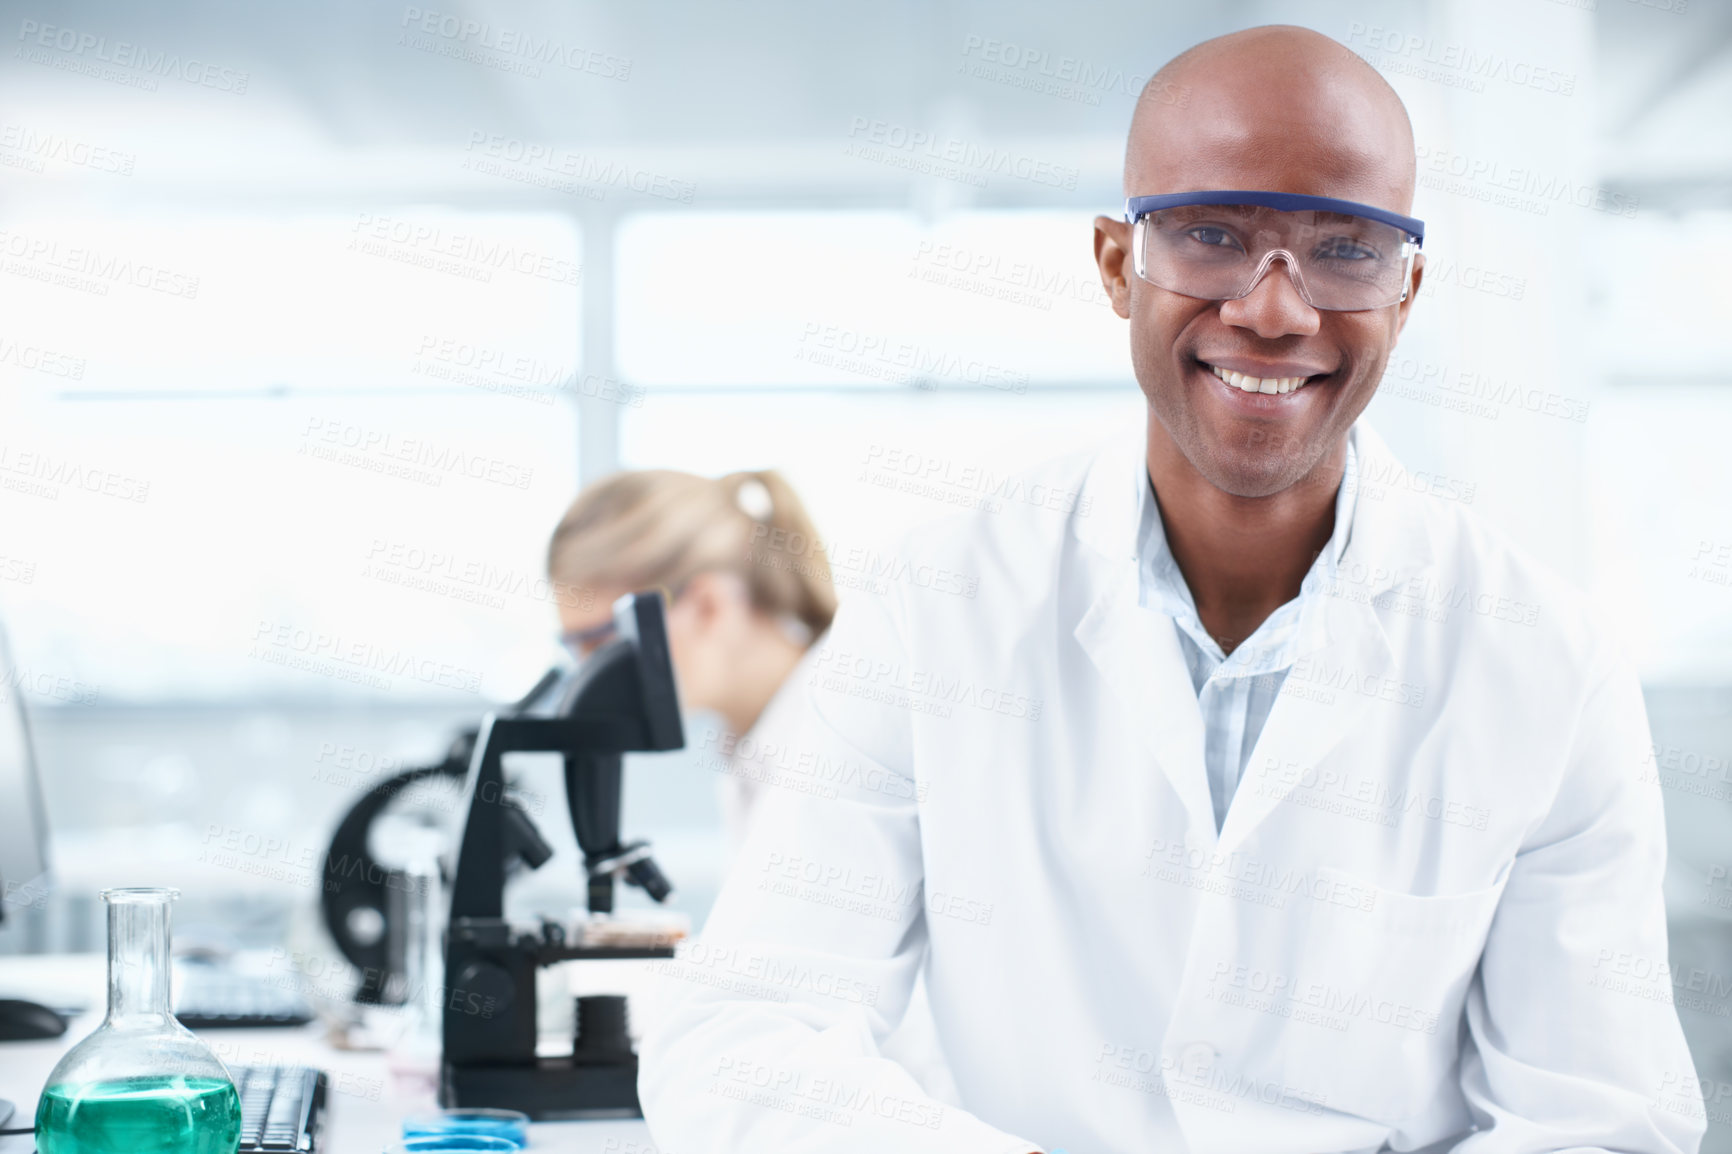 Buy stock photo Portrait of a smiling young chemist in the lab with a female coworker in the background